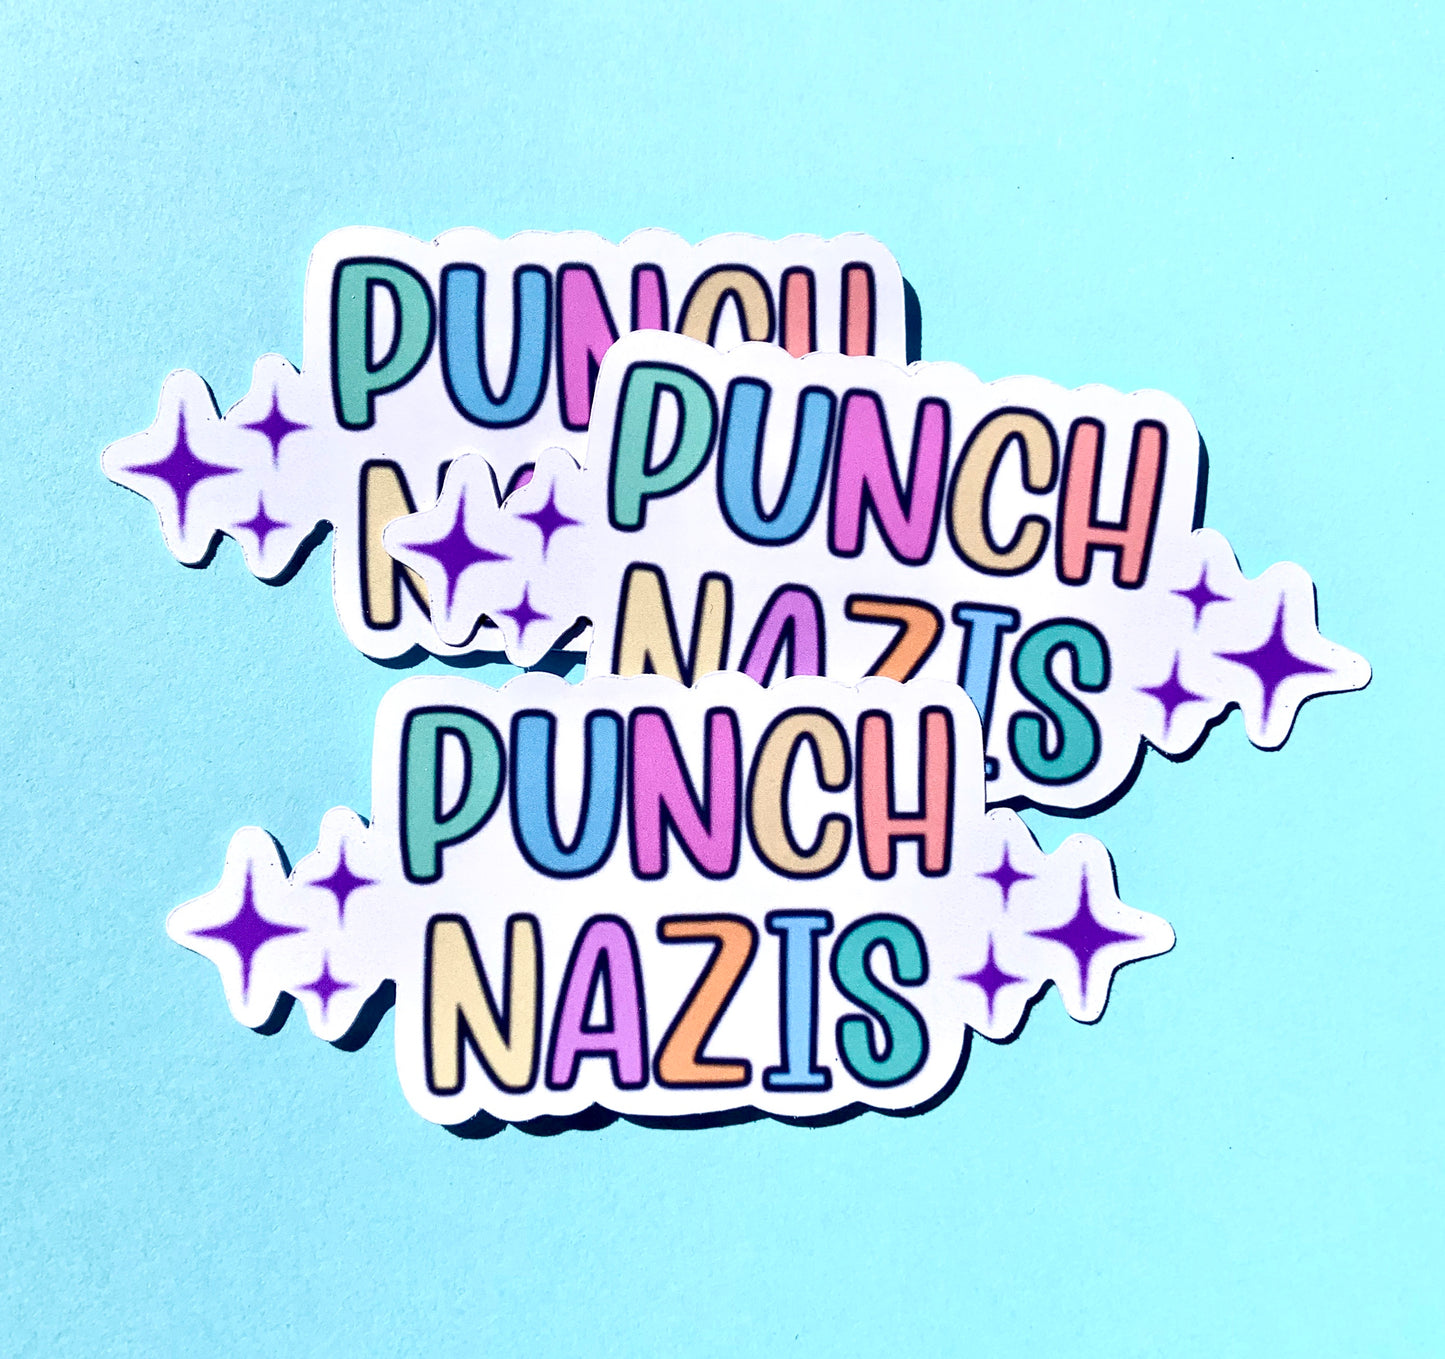 Punch Nazis stickers (pack of 3 or 5)